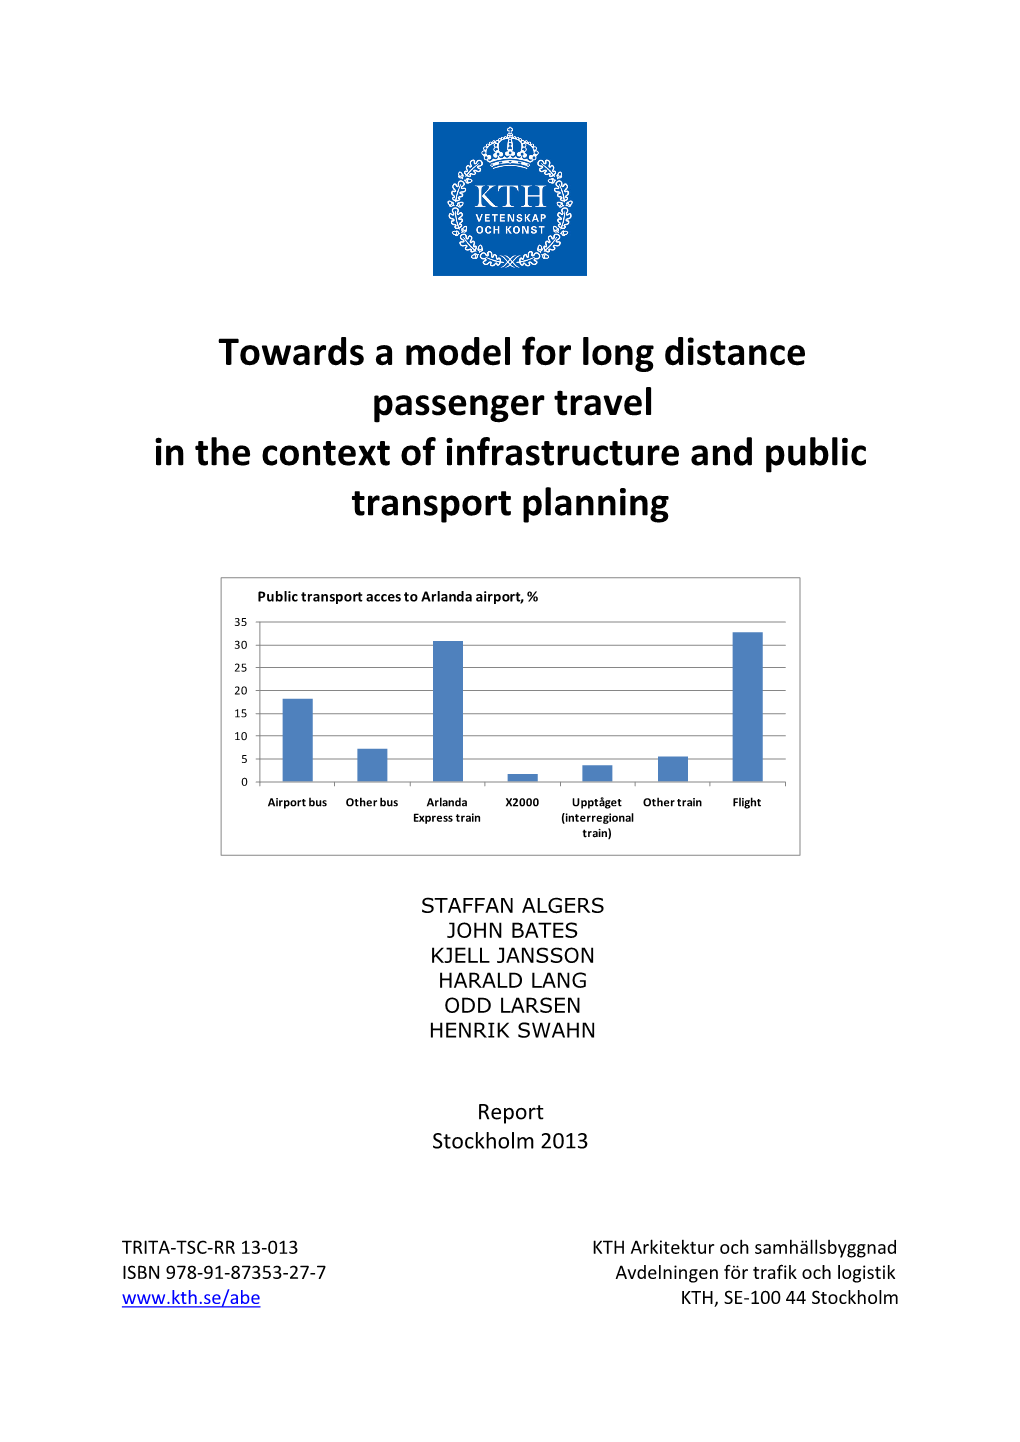 Towards a Model for Long Distance Passenger Travel in the Context of Infrastructure and Public Transport Planning